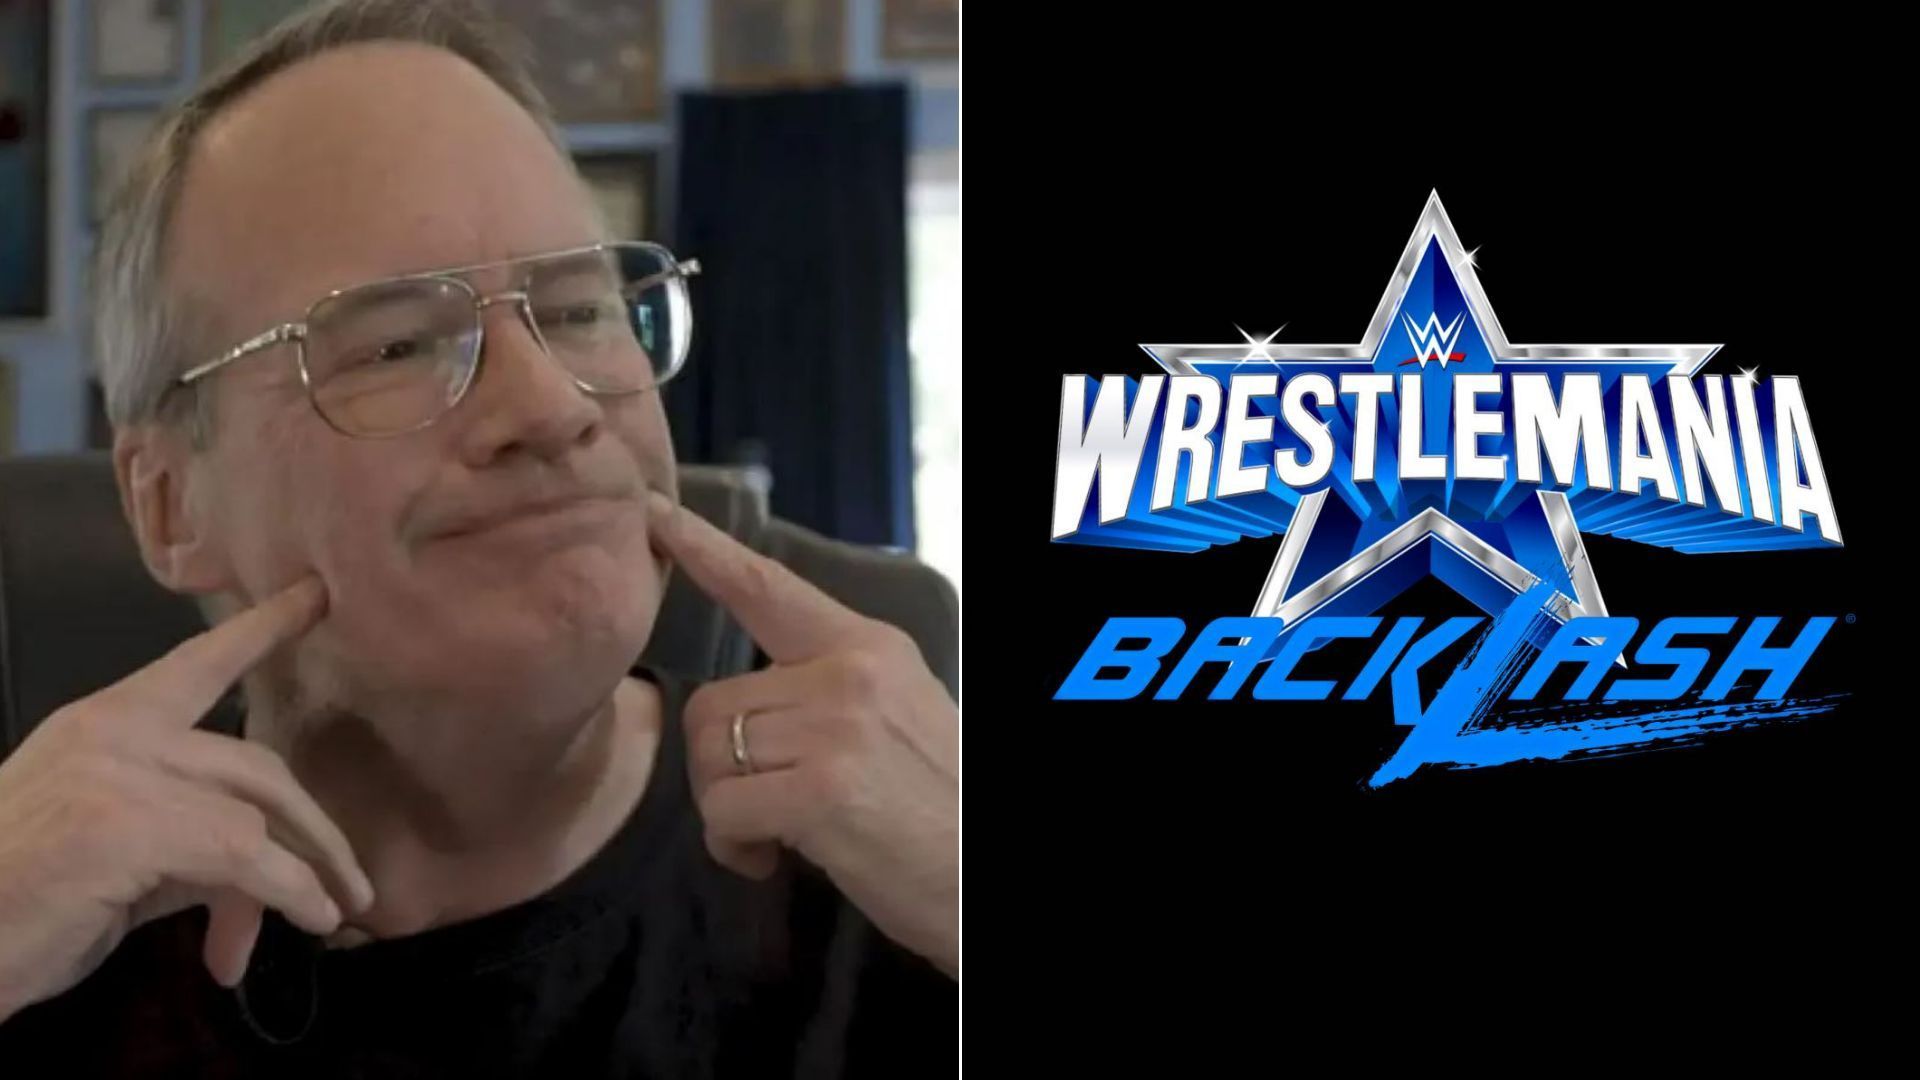 Jim Cornette had nothing but praise for a WrestleMania Backlash match